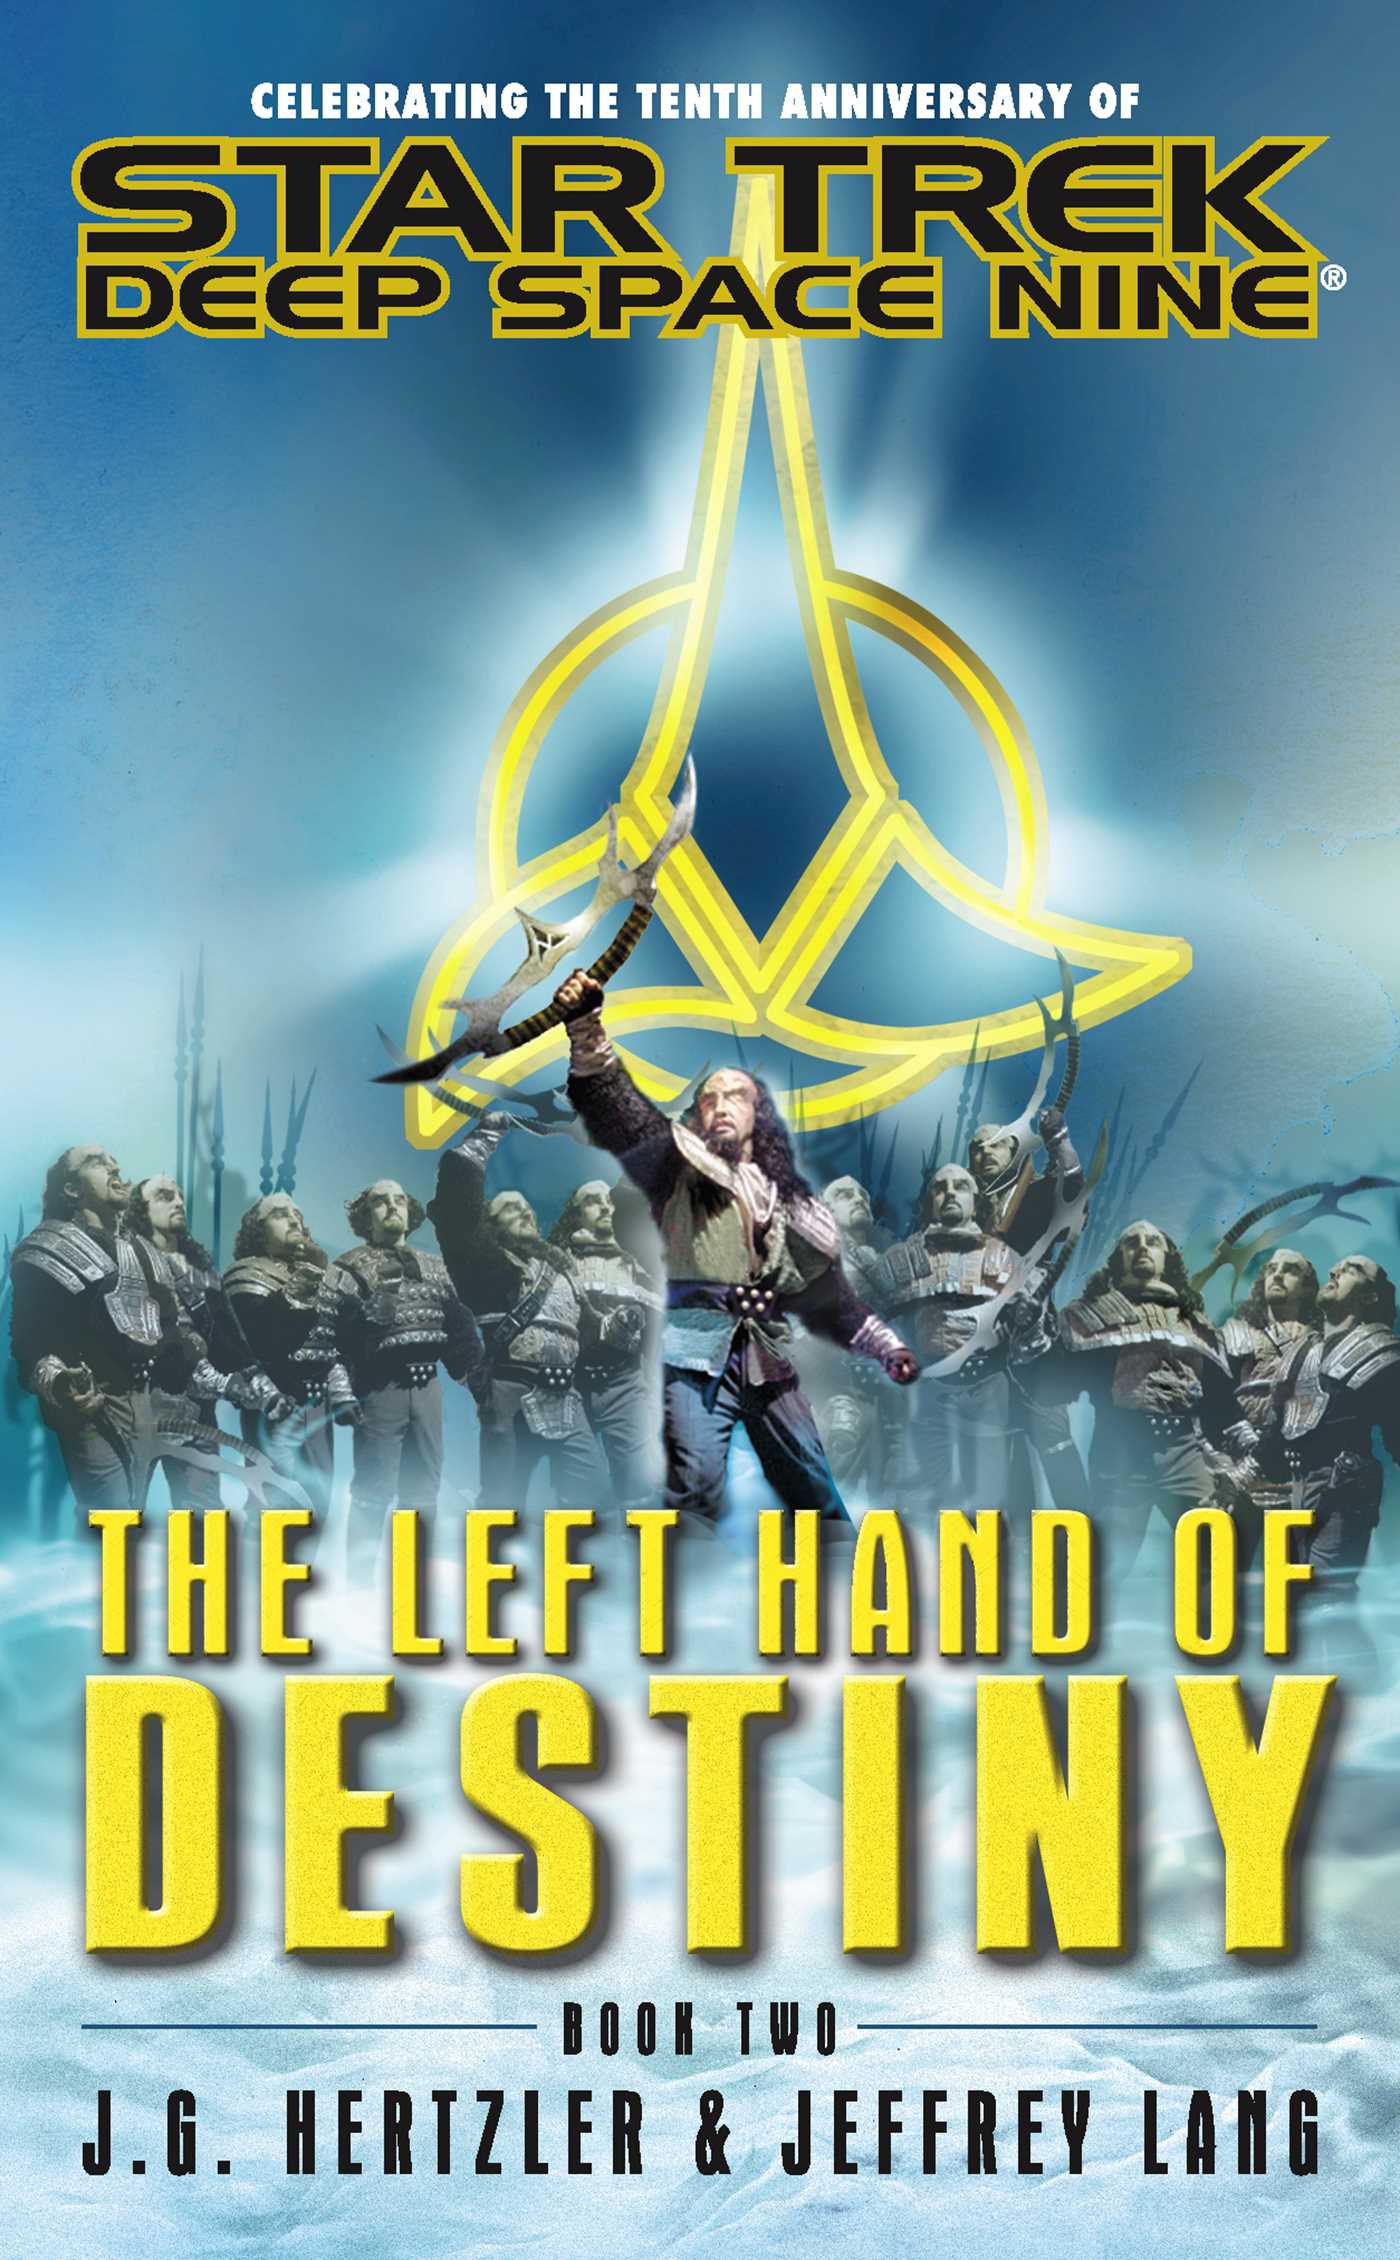 Left Hand of Destiny Book Two